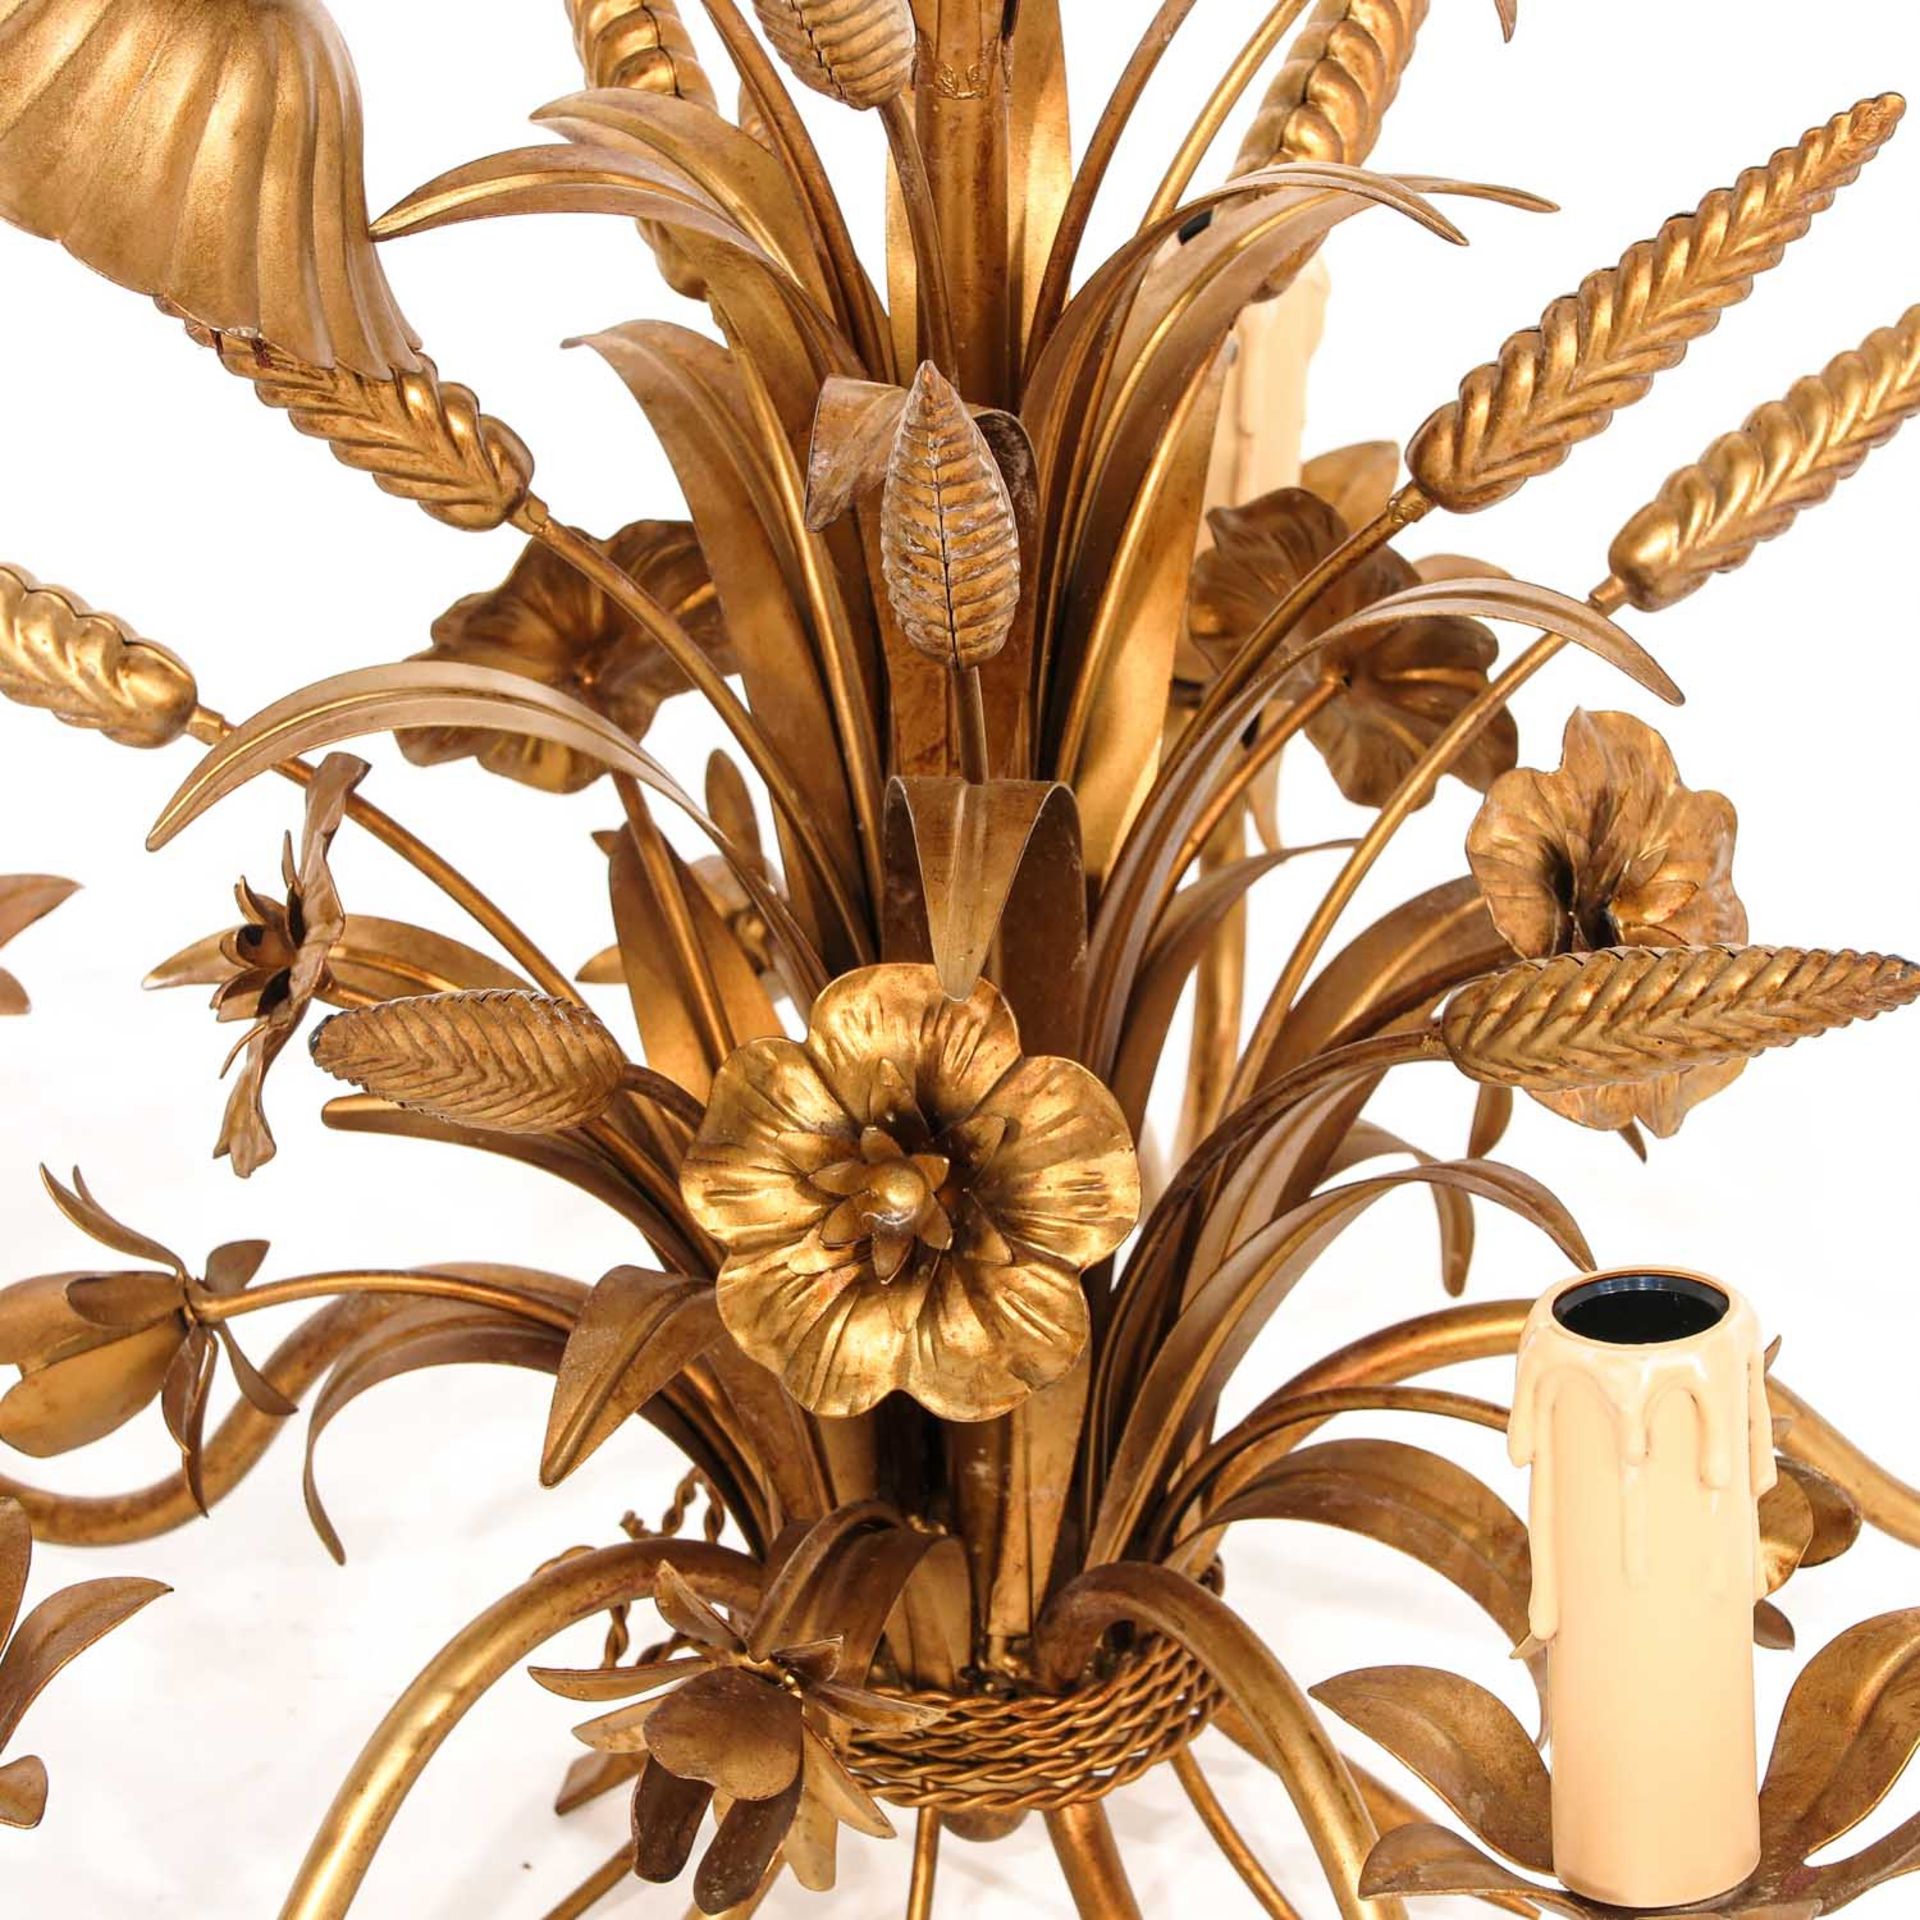 A Collection of 3 Wheat Chandeliers - Image 7 of 9